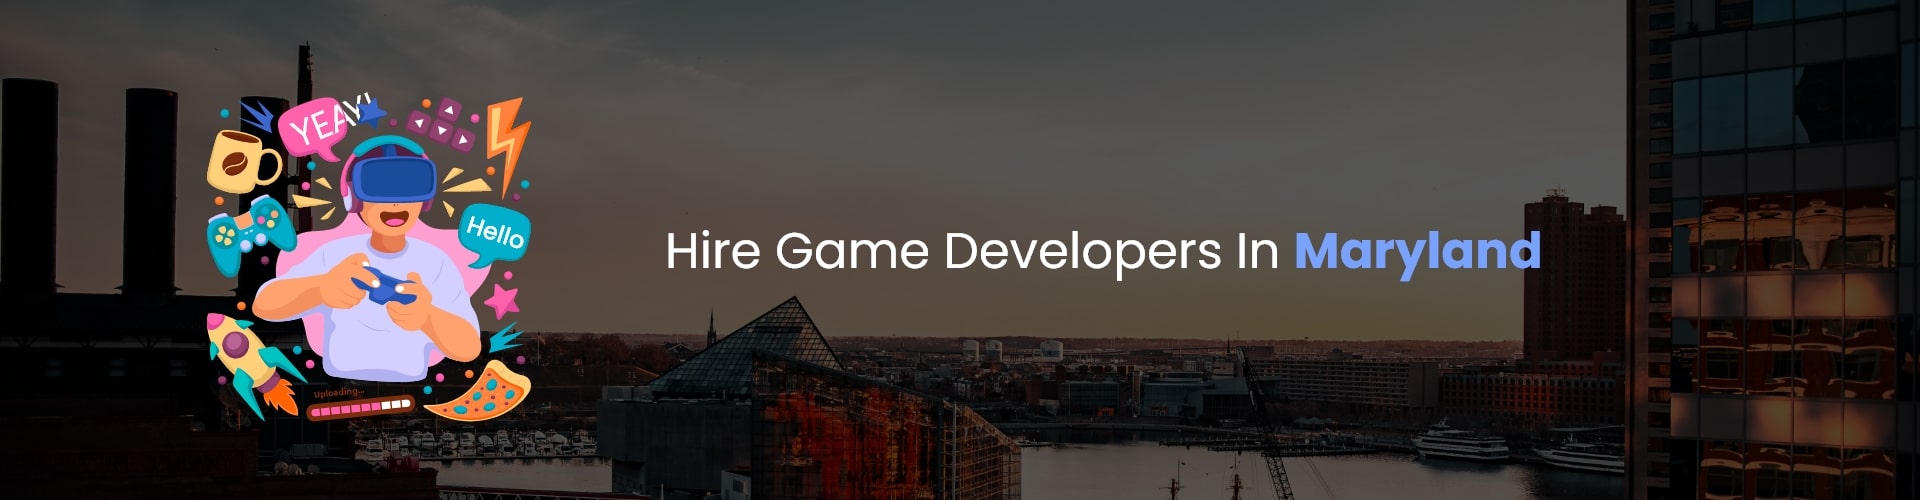 hire game developers in maryland